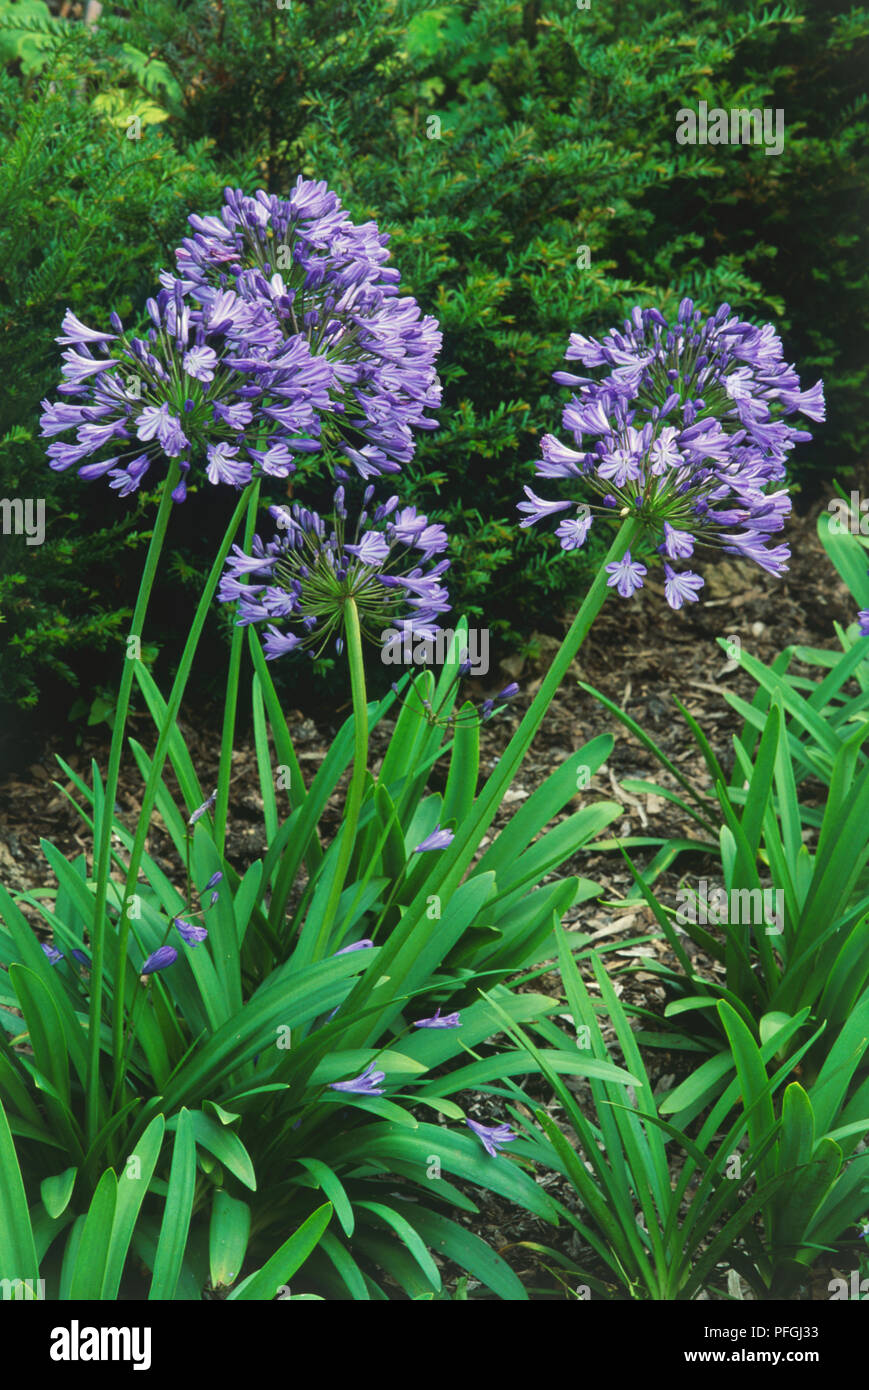 Agapanthus, Blue Giant or African Blue Lily flowers. Stock Photo